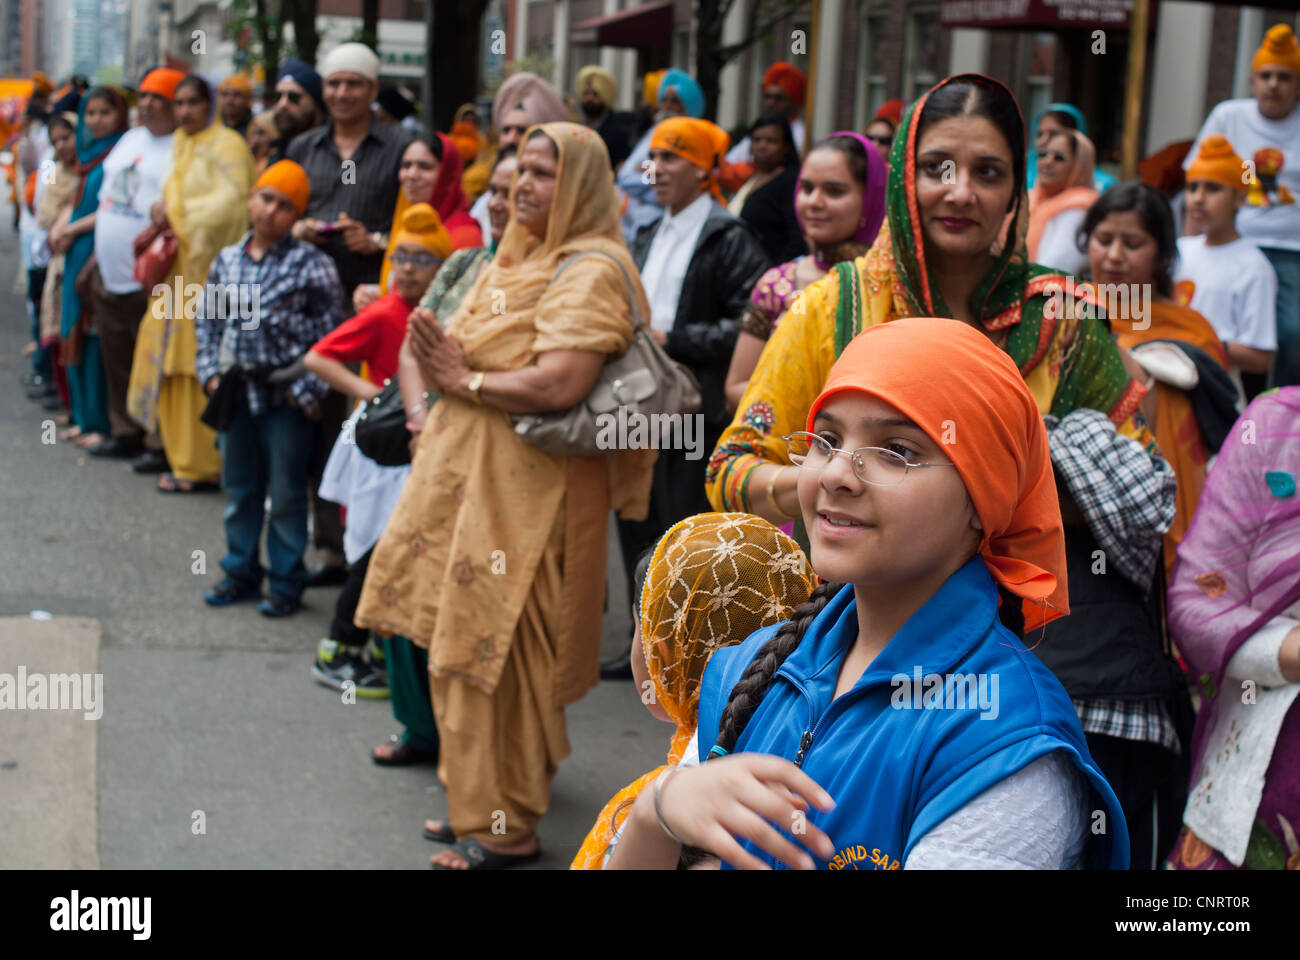 Thousands watch and participate in the 25th Annual Sikh Day Parade in